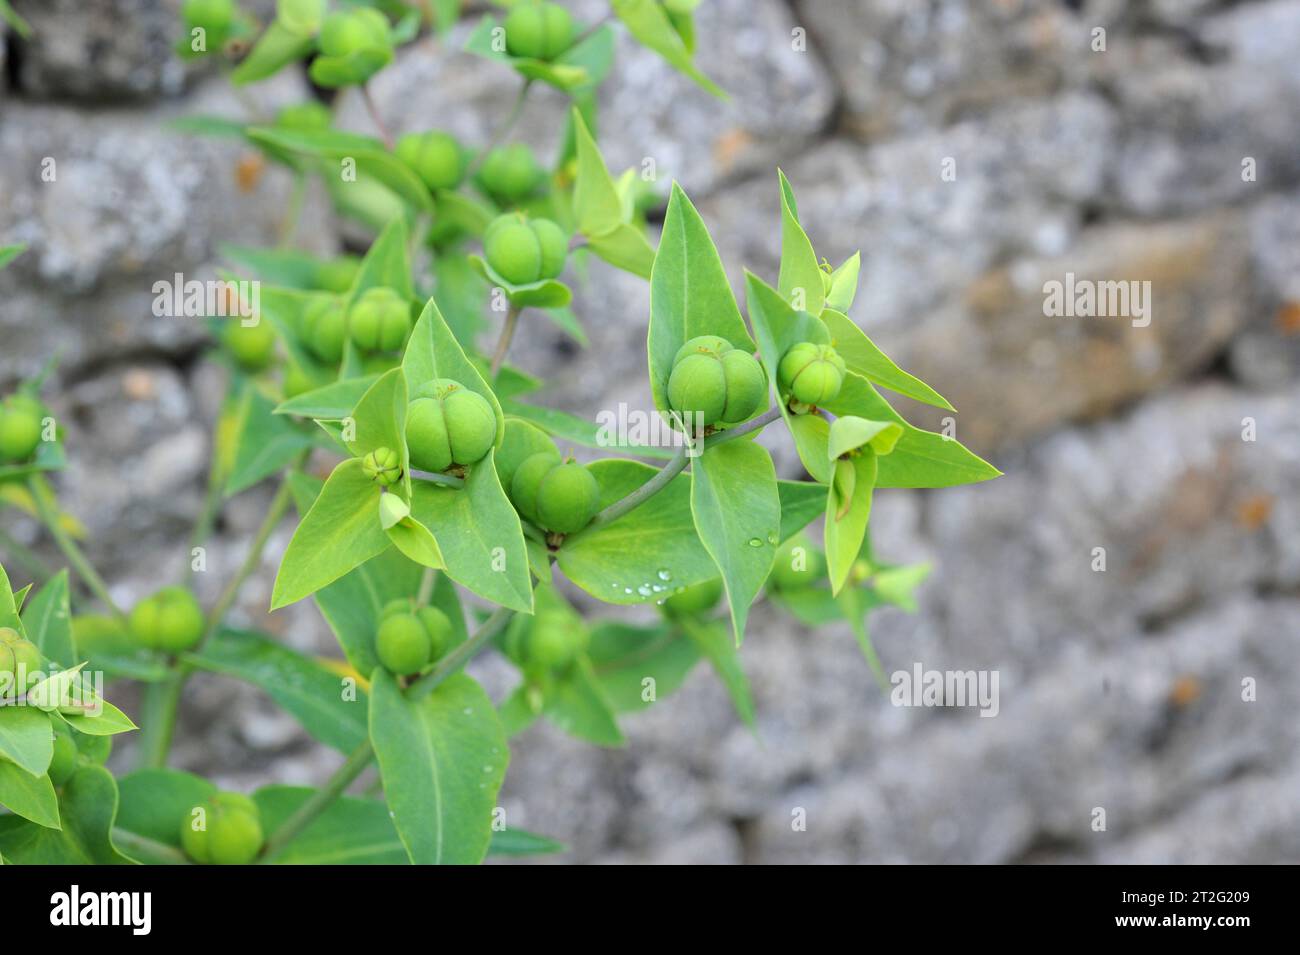 Caper spurge (Euphorbia lathyris) is a biennial herb native to south Europe, northwest Africa and southwest Asia. Its latex is poisonous. Stock Photo